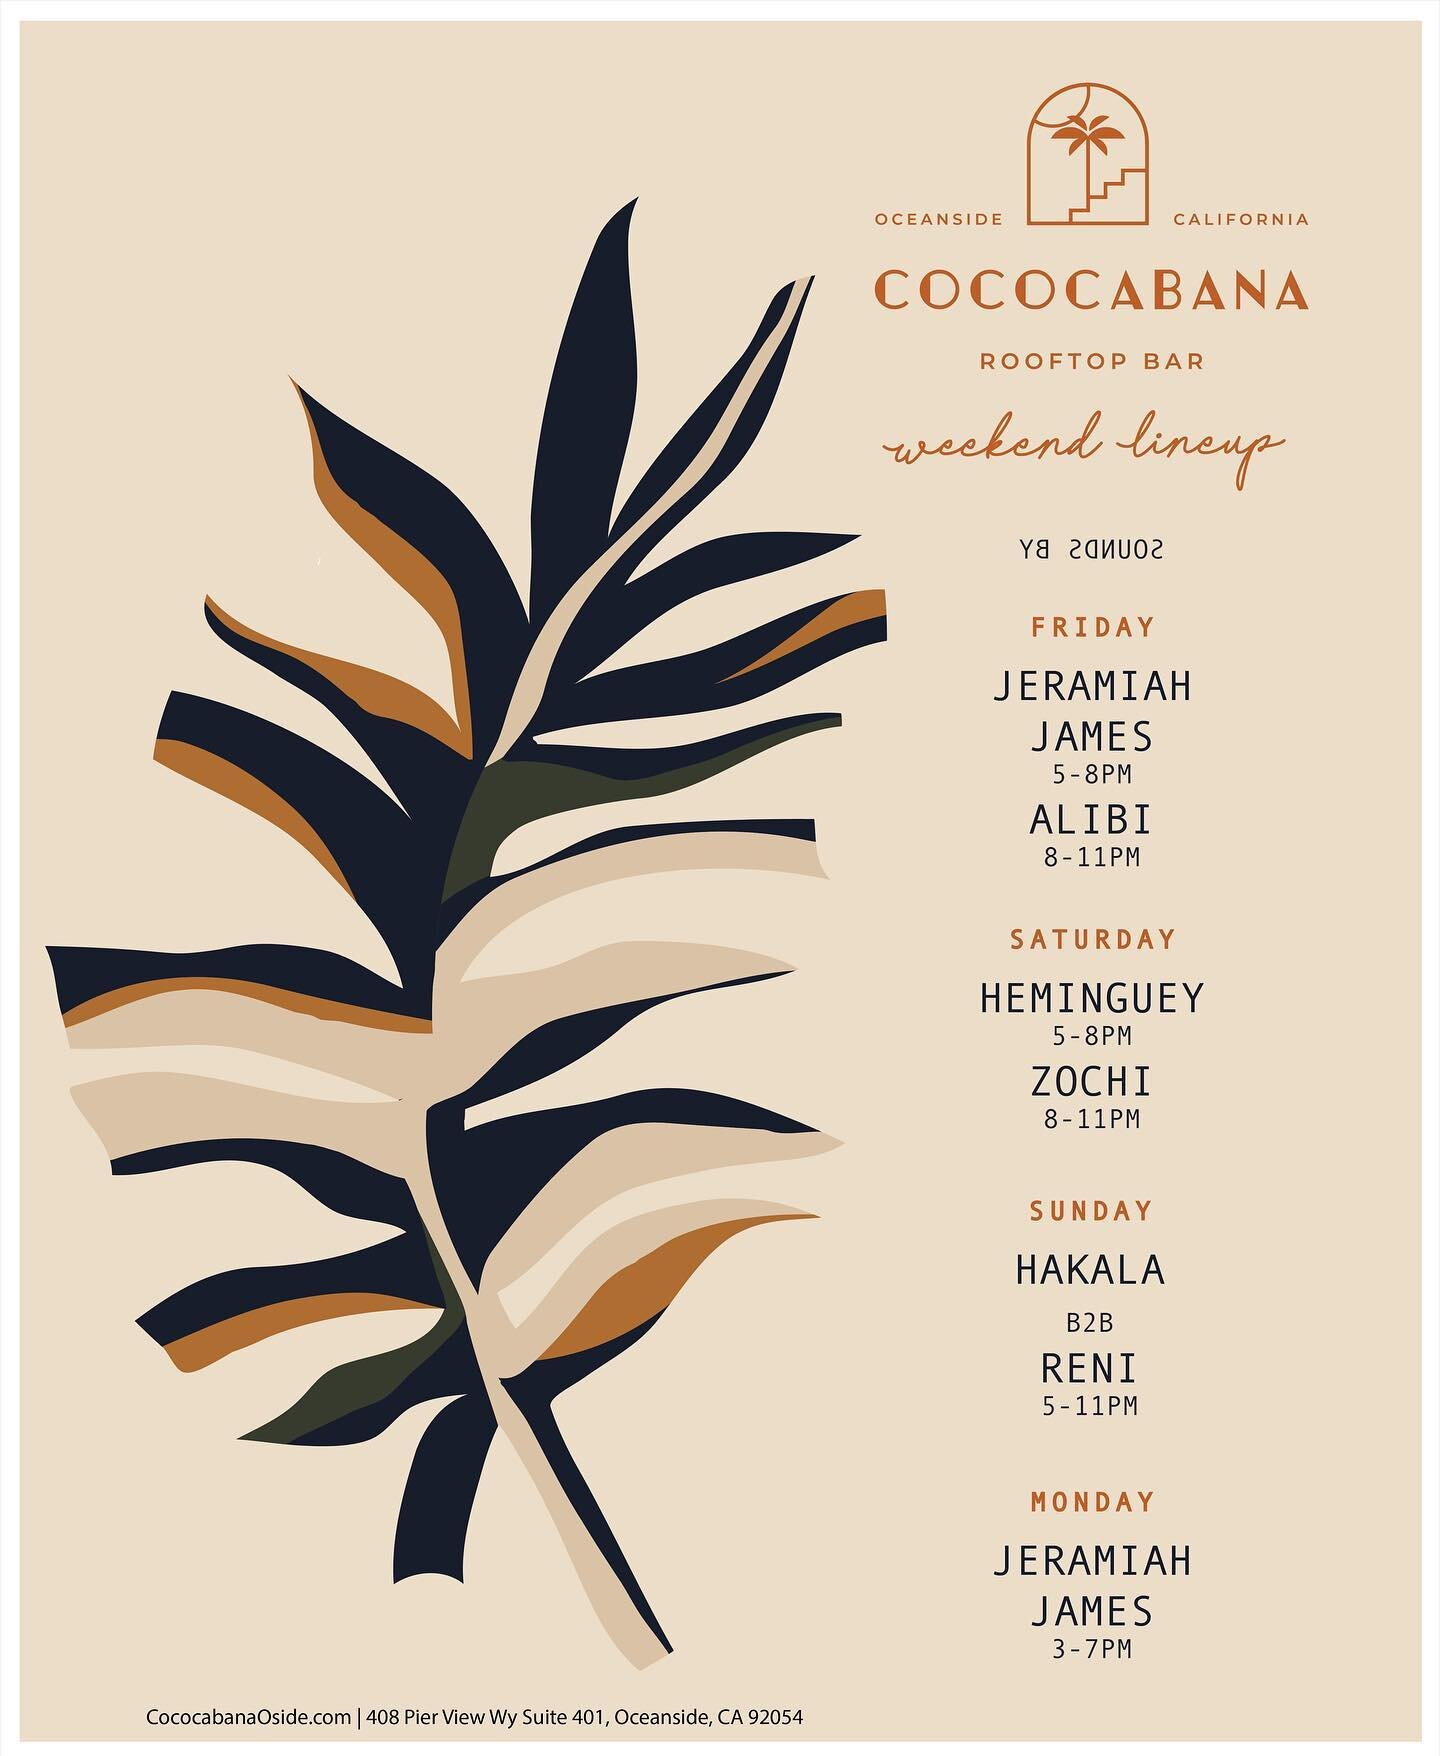 what better way to spend labor day weekend than vibing to house music at the new @cococabanaoside rooftop bar? i really don&rsquo;t think there&rsquo;s a better alternative. i&rsquo;ll be making my cali debut this sunday b2b with the amazing @hakala_